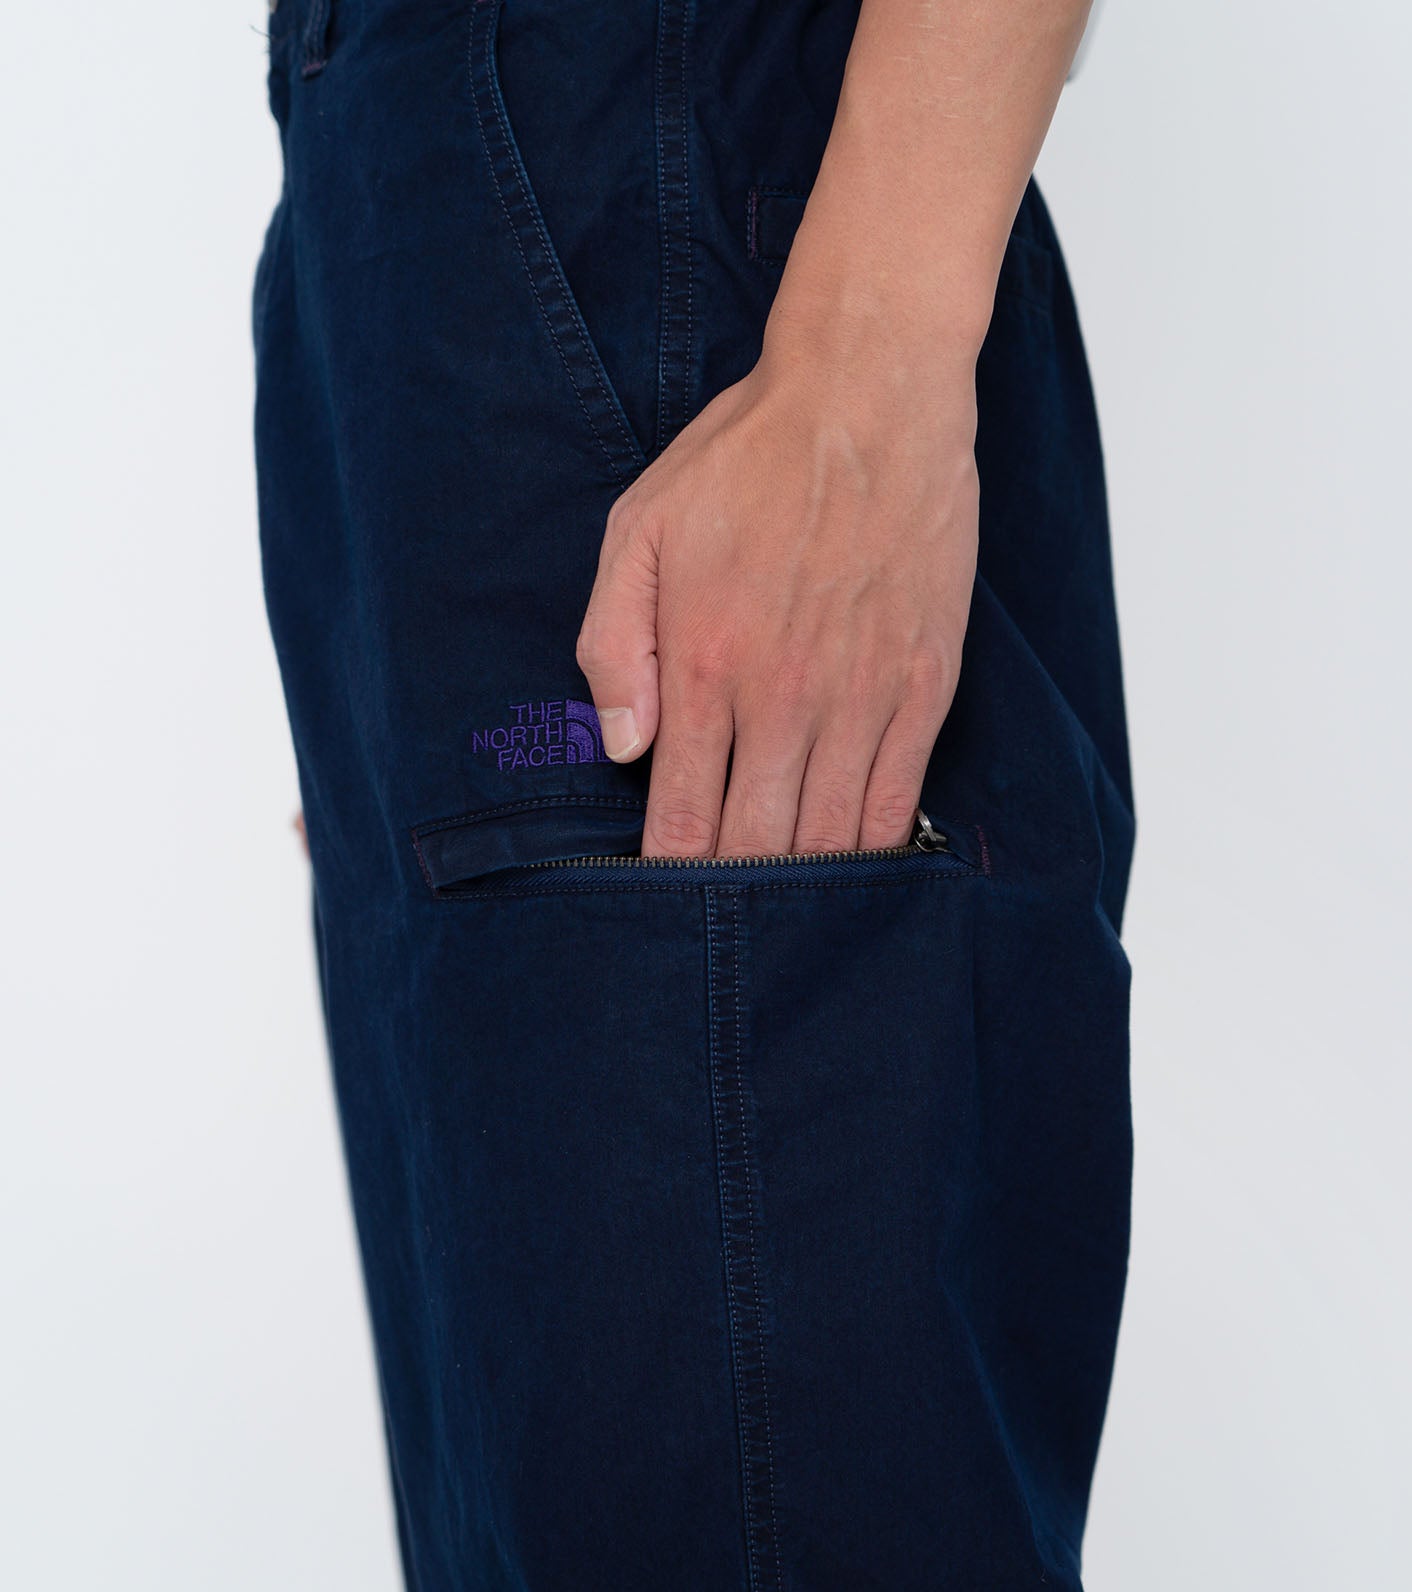 THE NORTH FACE PURPLE LABEL Stroll Field Pants